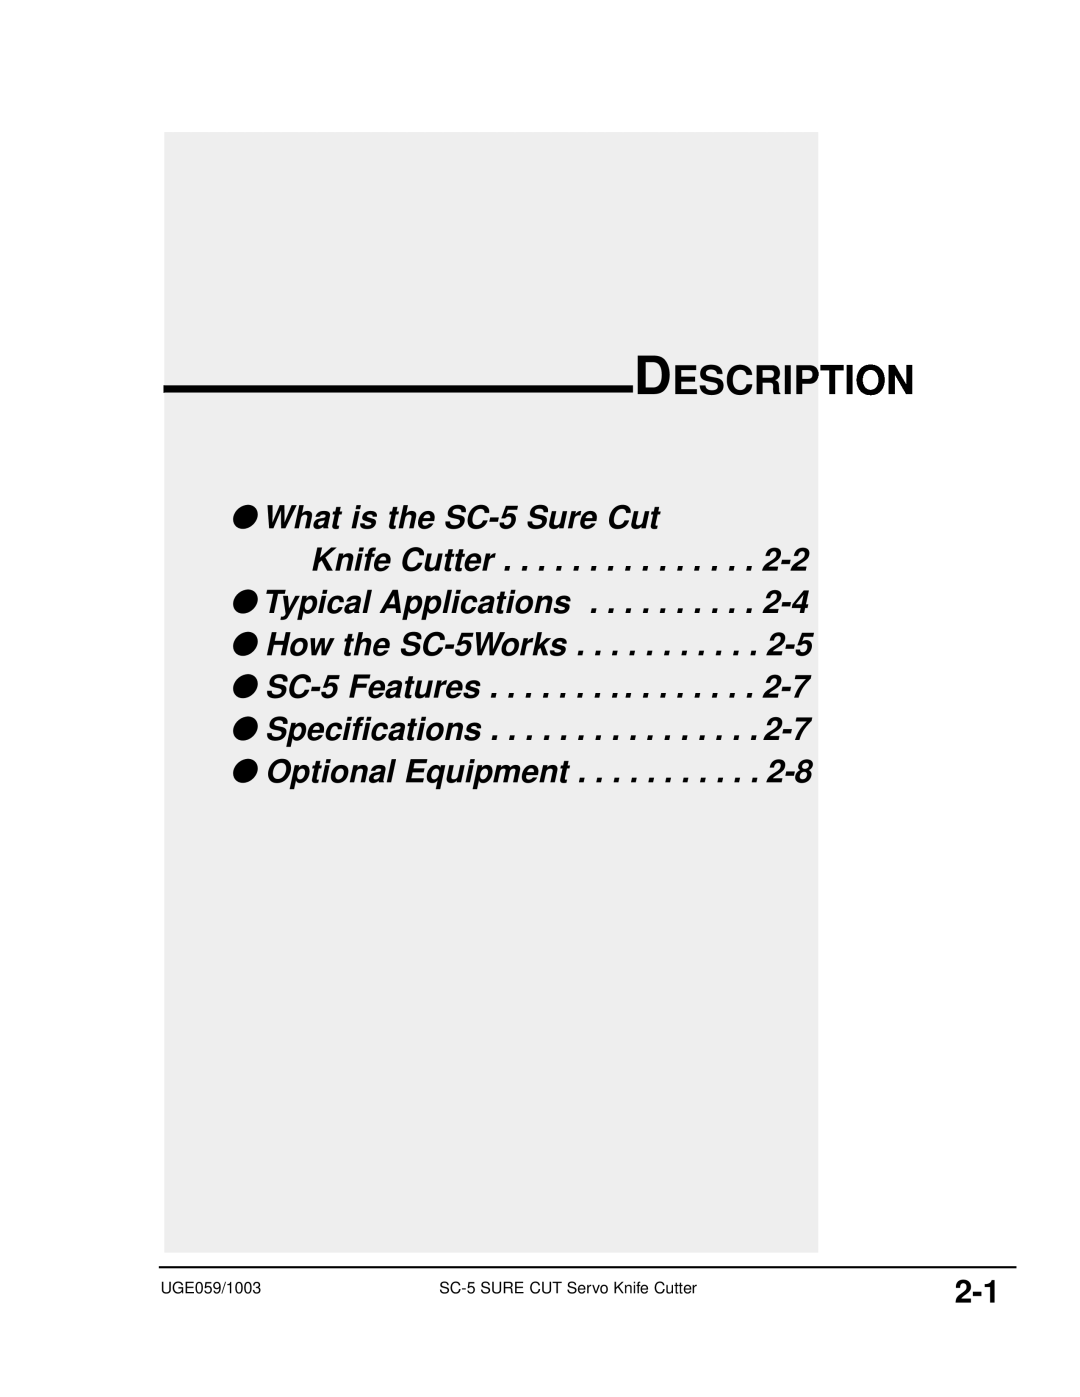 Conair manual Description, What is the SC-5 Sure Cut Knife Cutter Typical Applications 